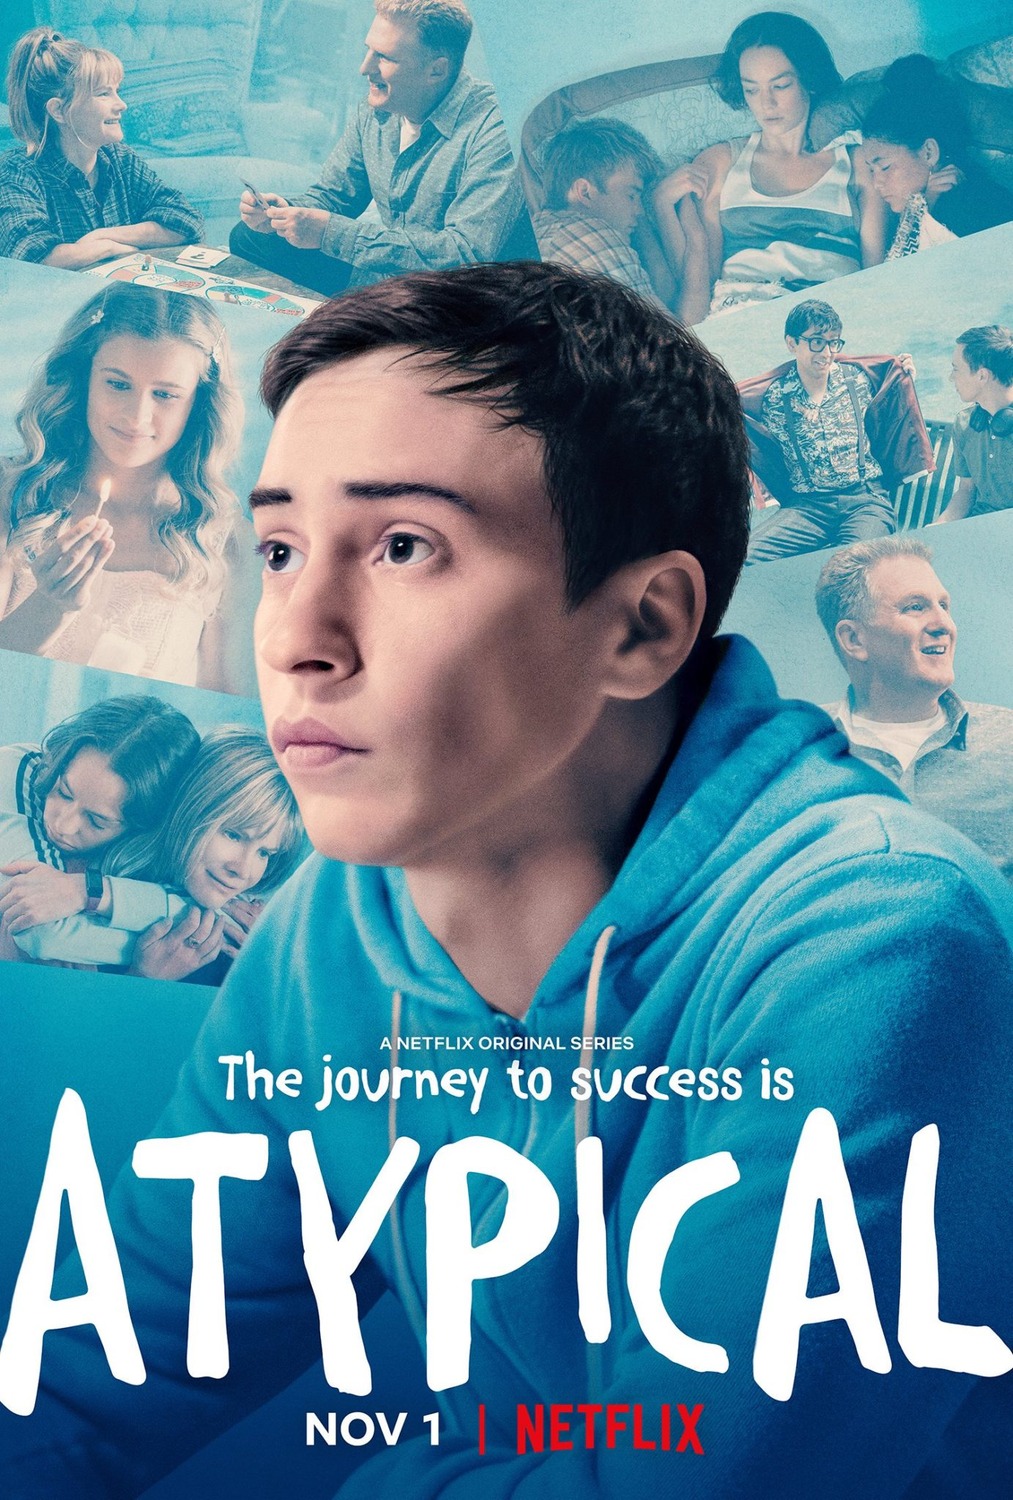 Atypical cast